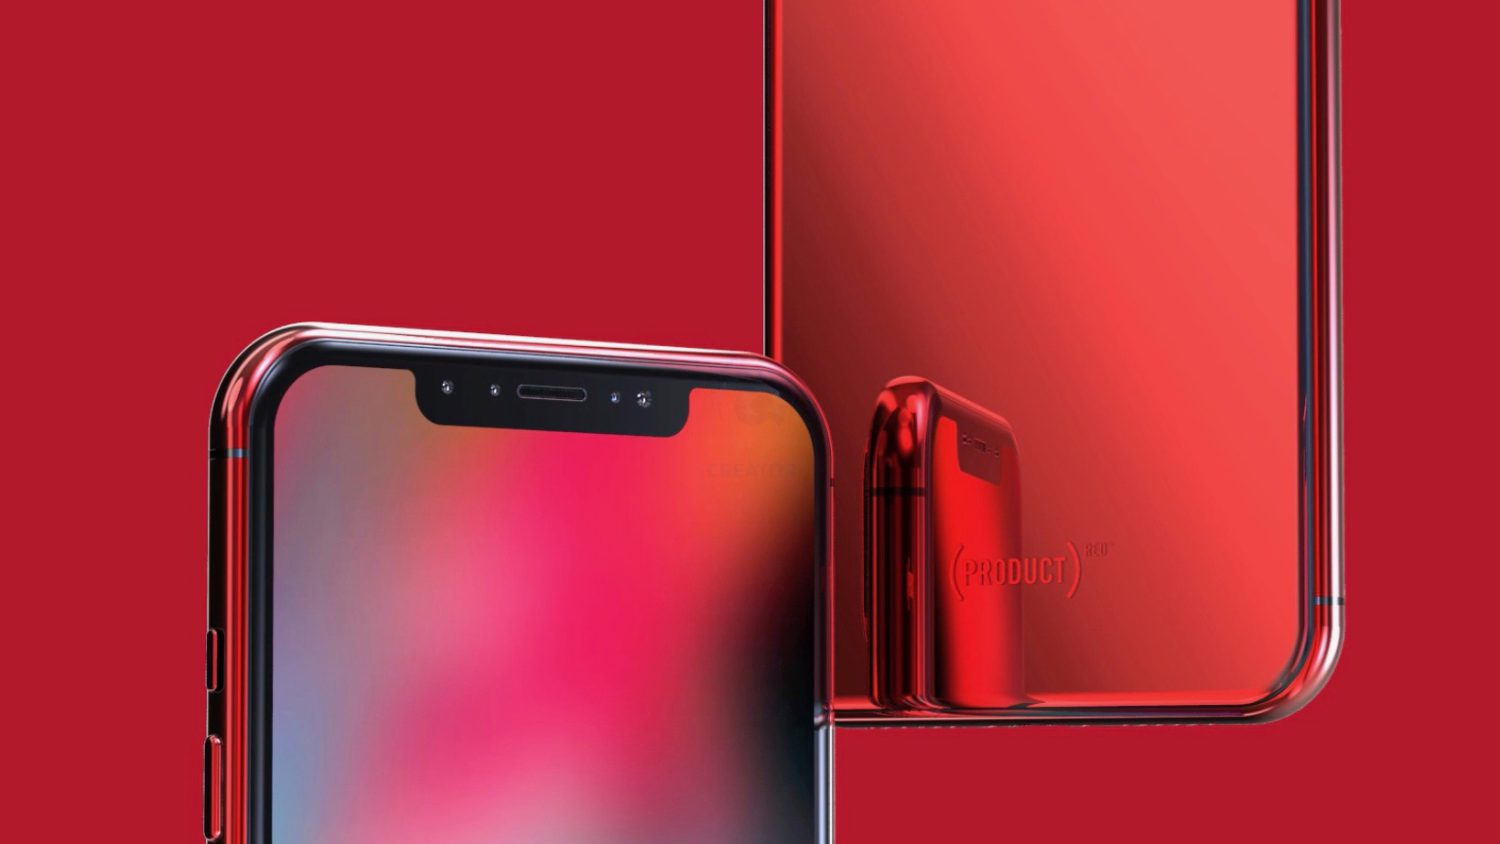 iphone x red